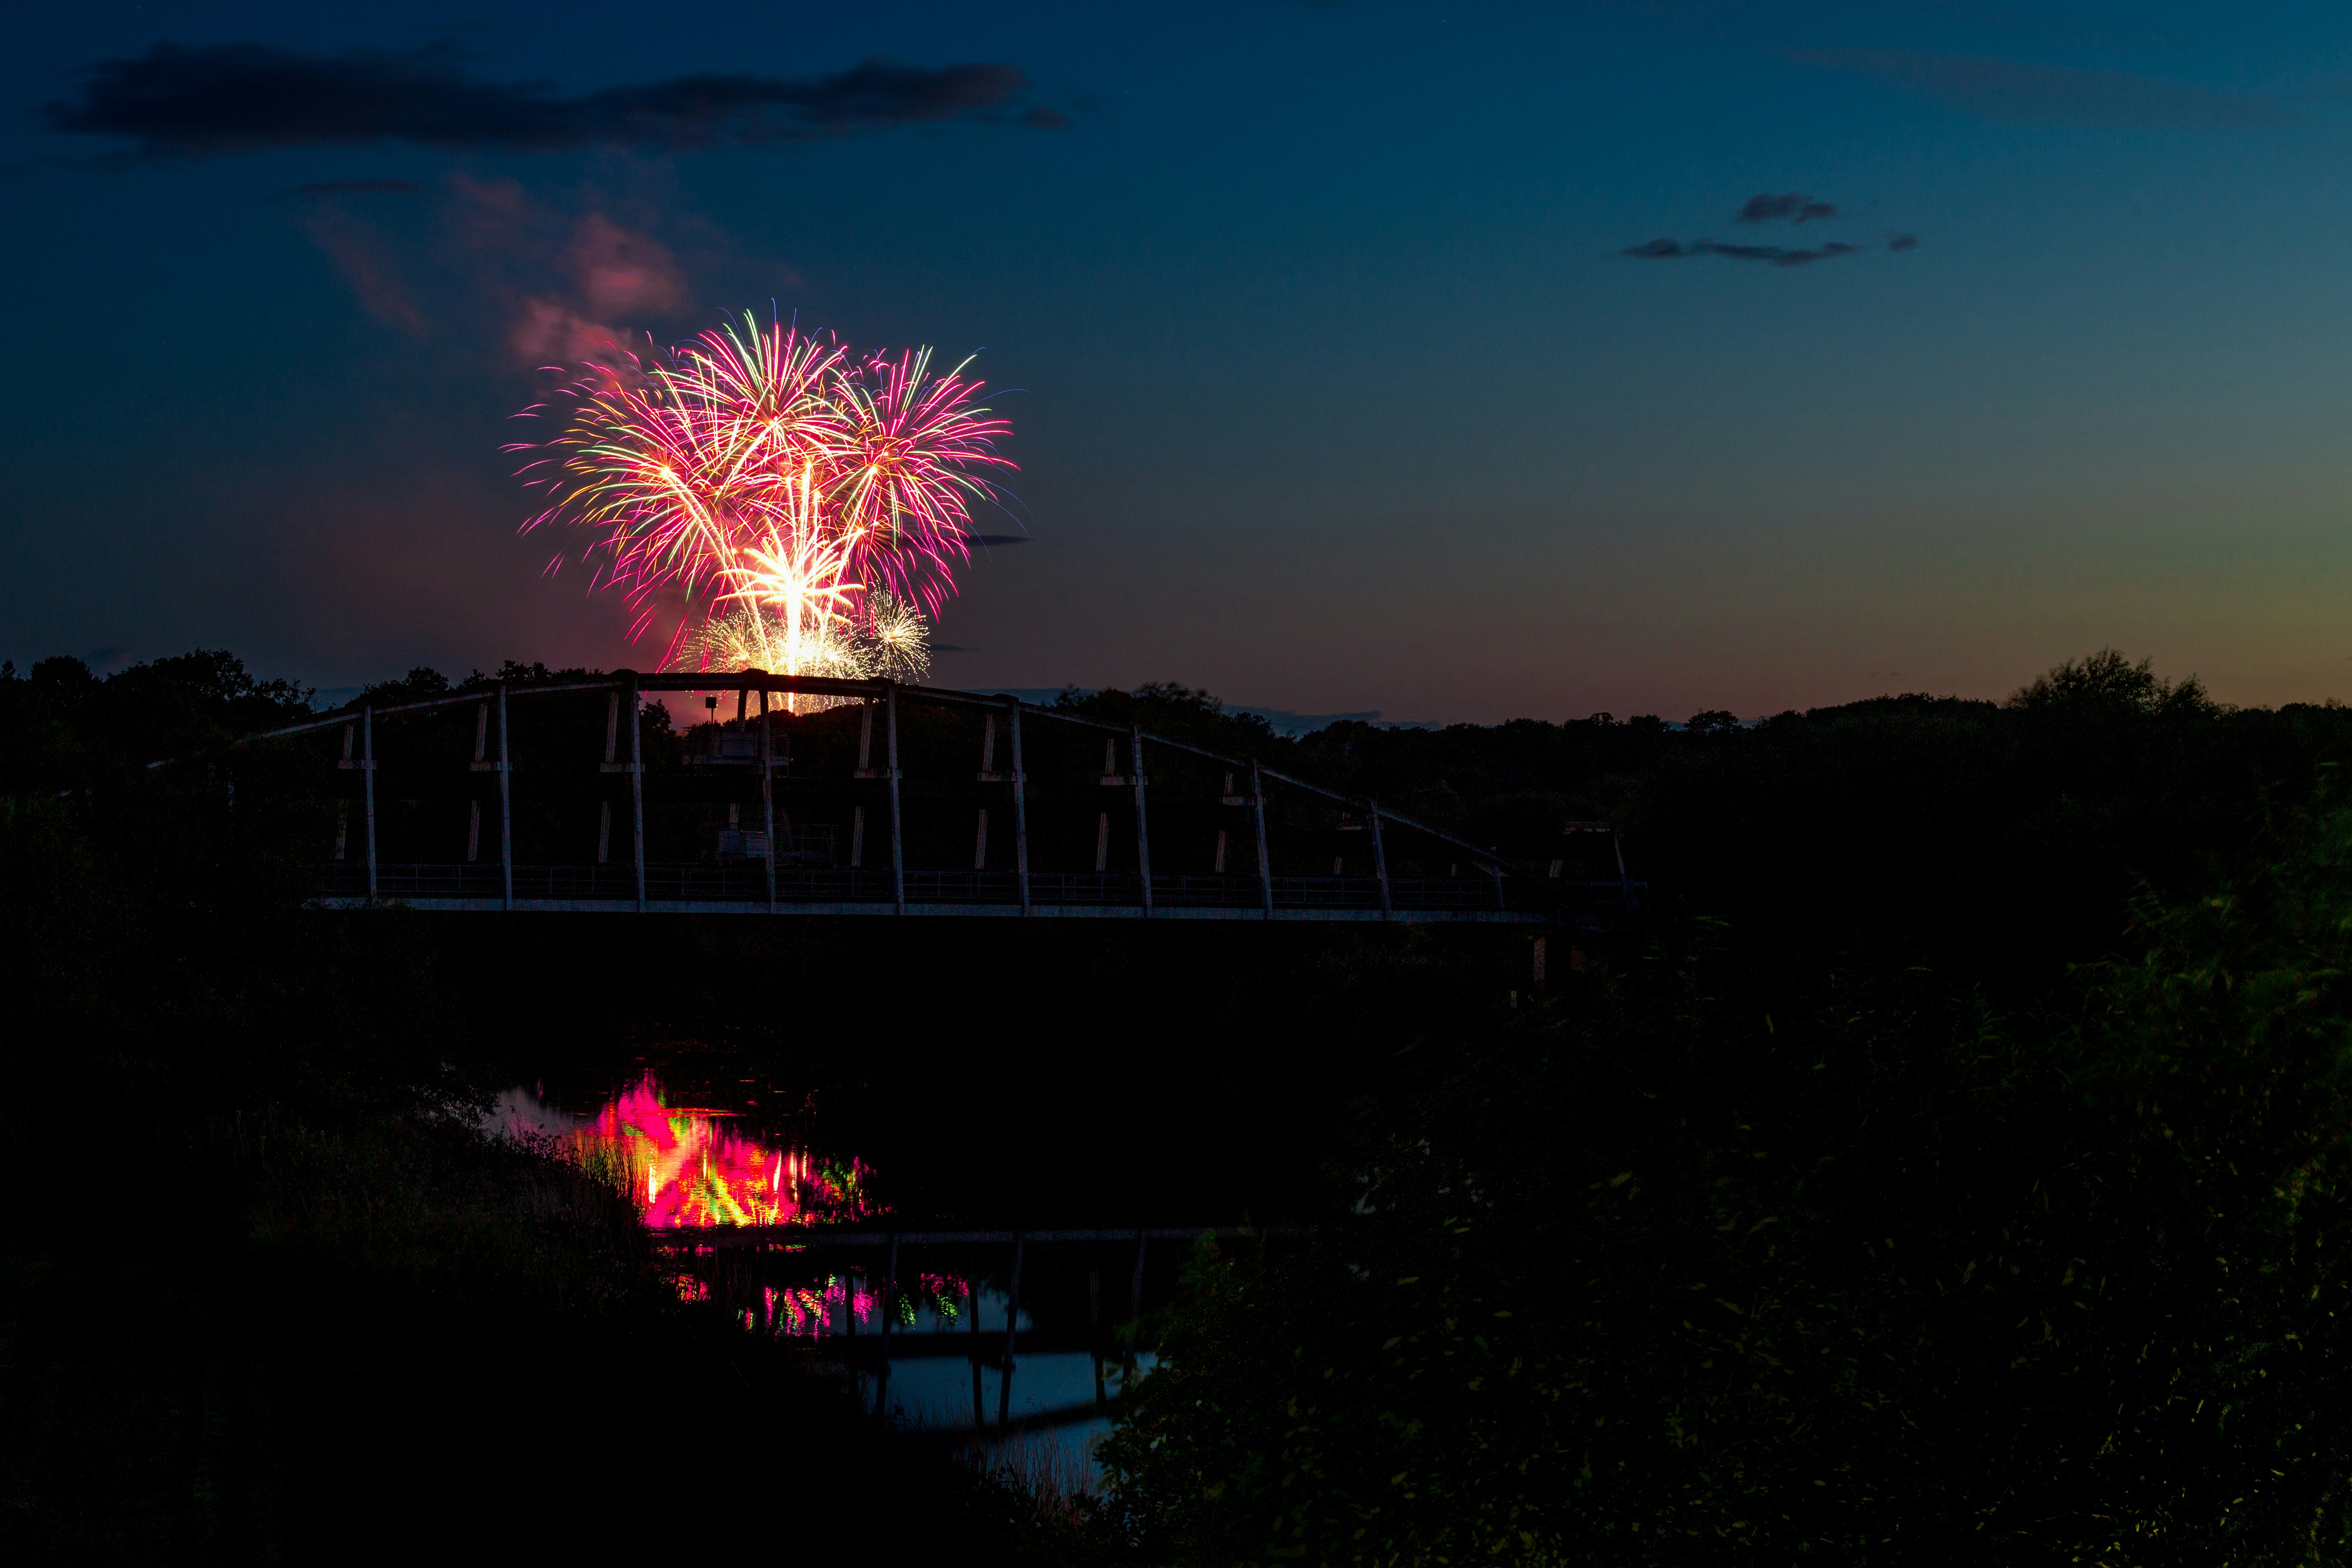 silhouette photo of suspension bridge in front of fireworks